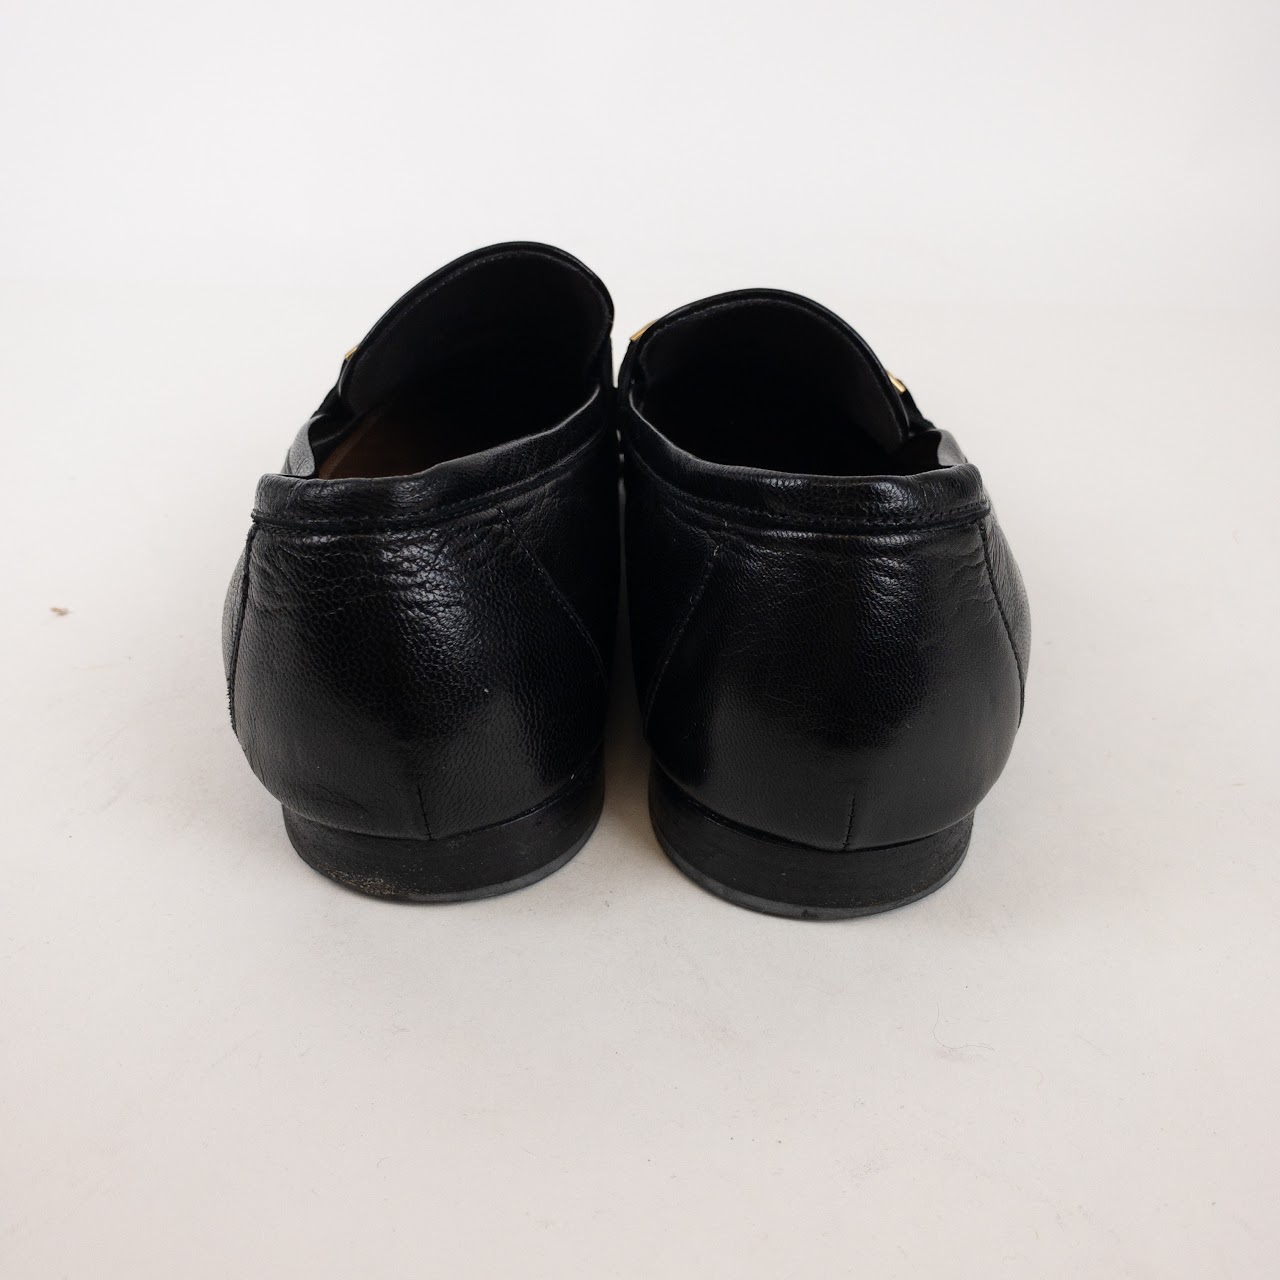 Dunhill Black Leather Horsebit Loafers